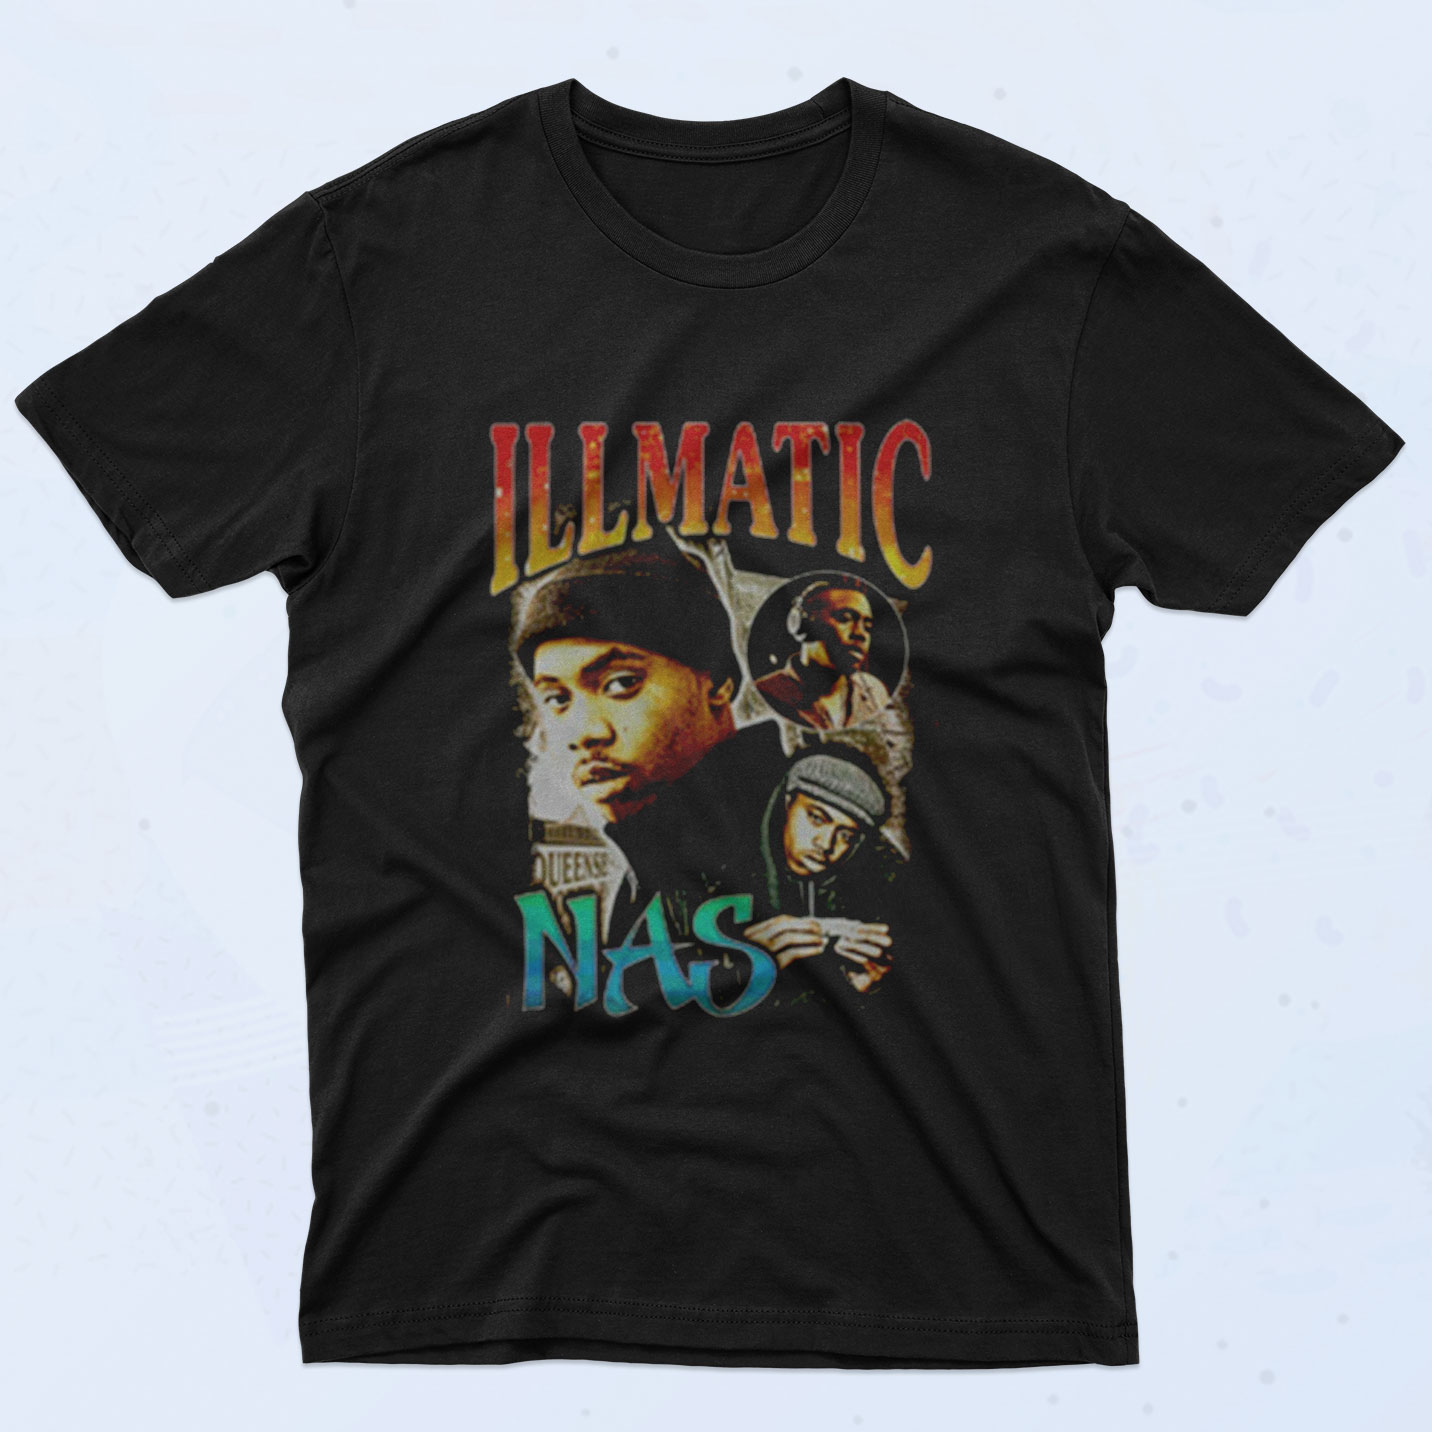 Illmatic Nas Whose World 90s T Shirt Style - 90sclothes.com